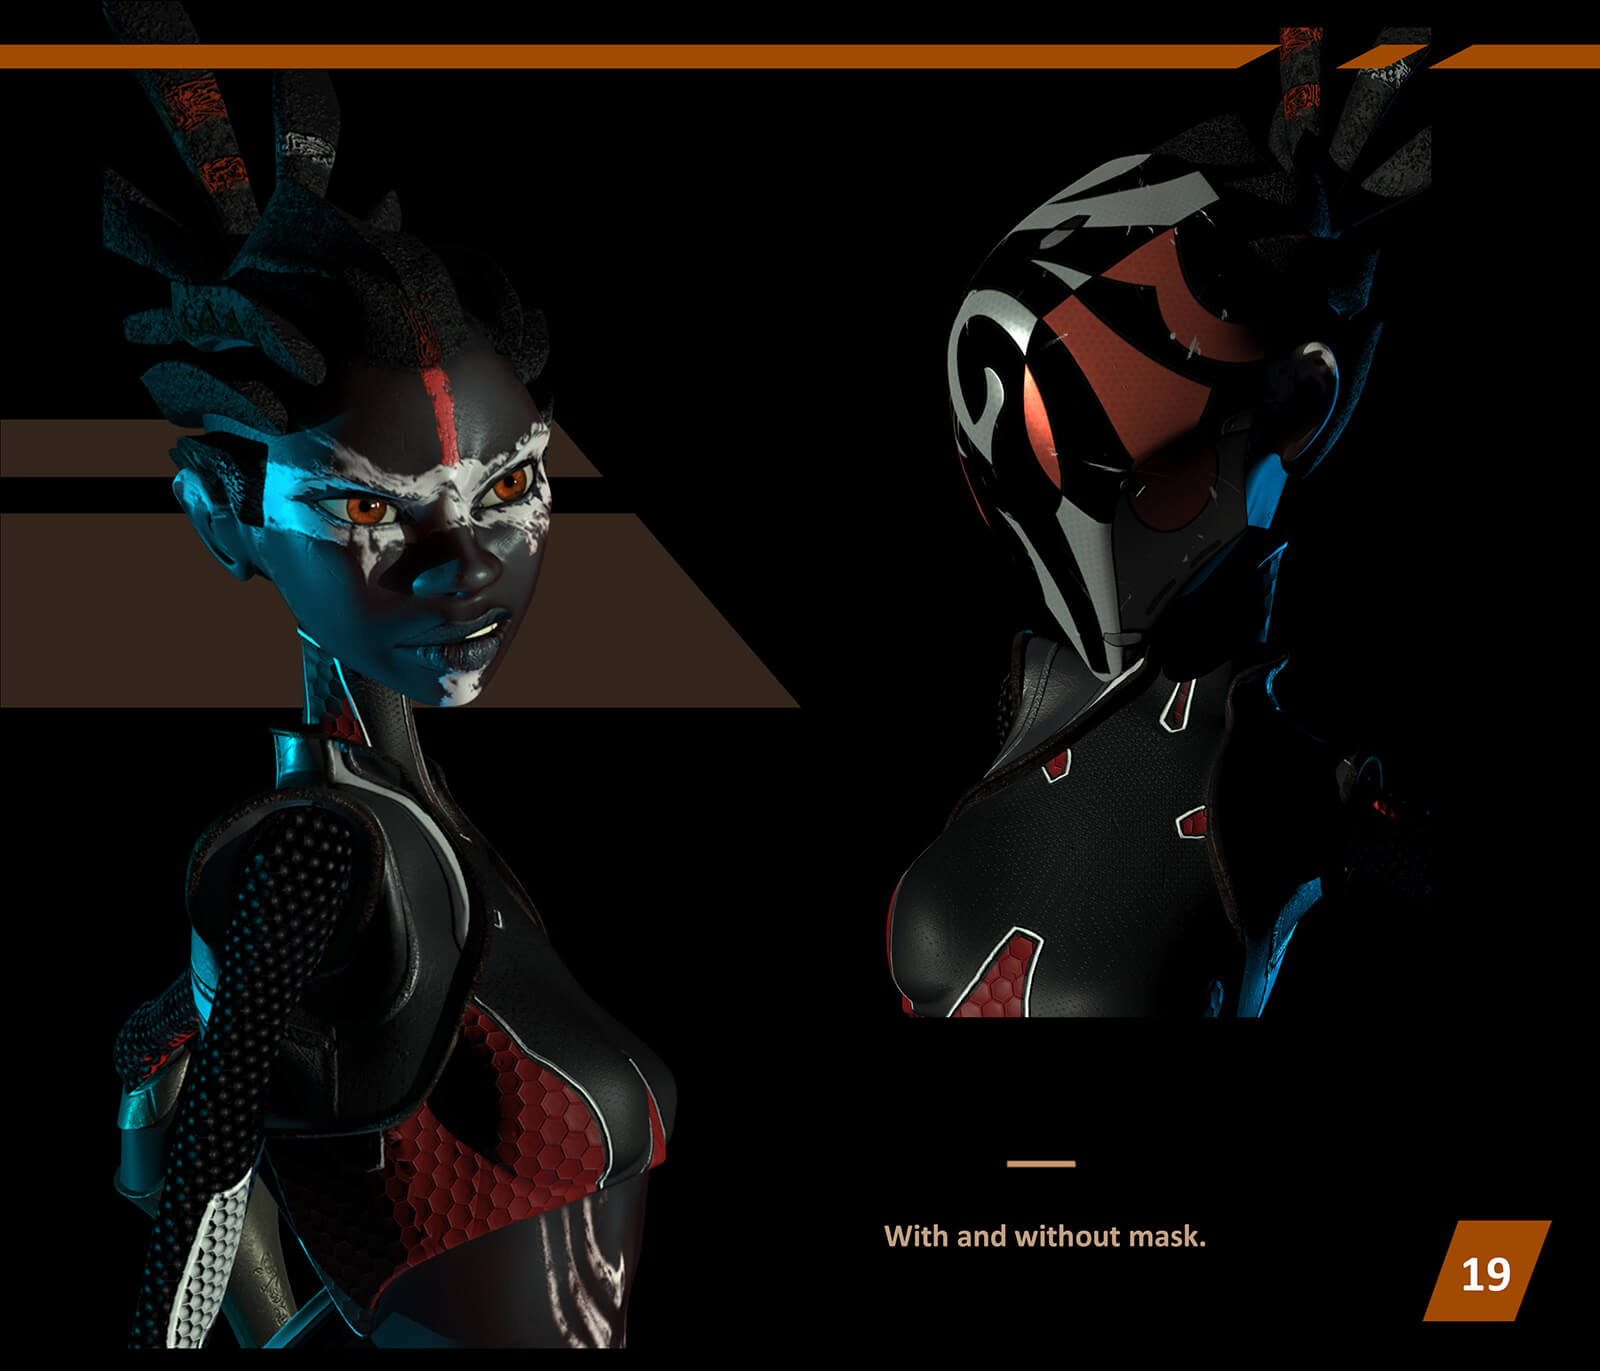 3D model of a woman with black, white, and red face paint with and without a mask